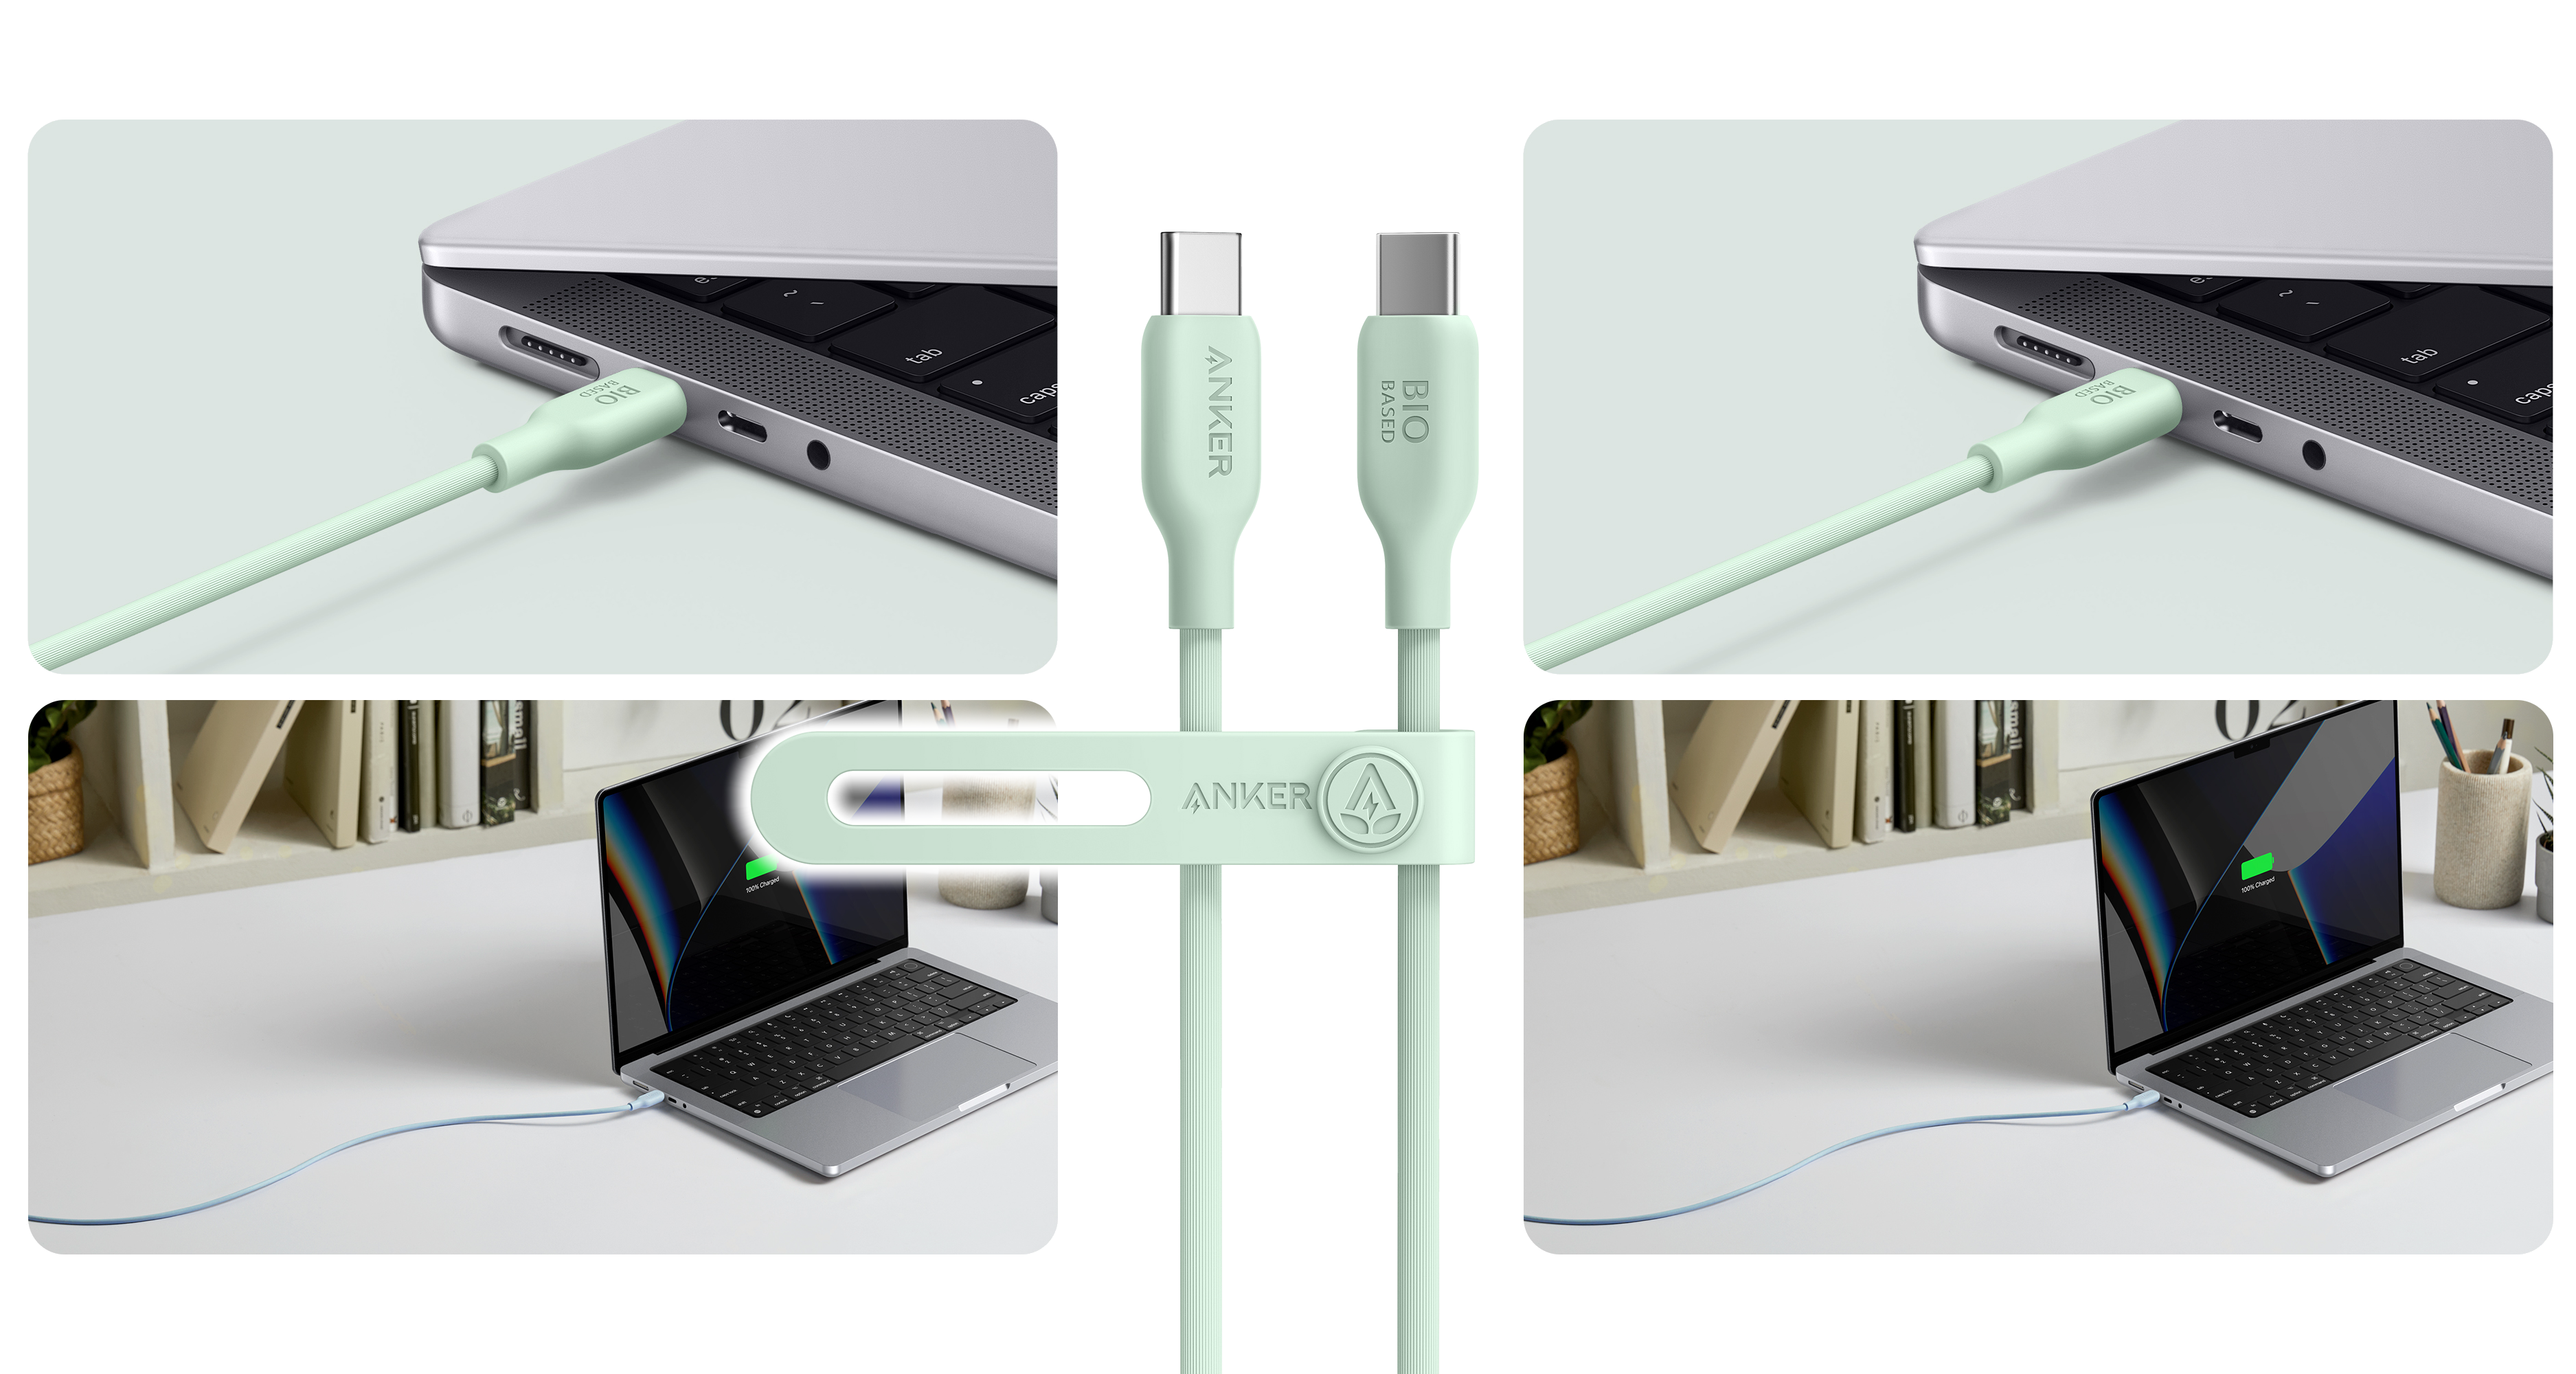 Anker's New USB-C Cables Use Plant-Based Materials